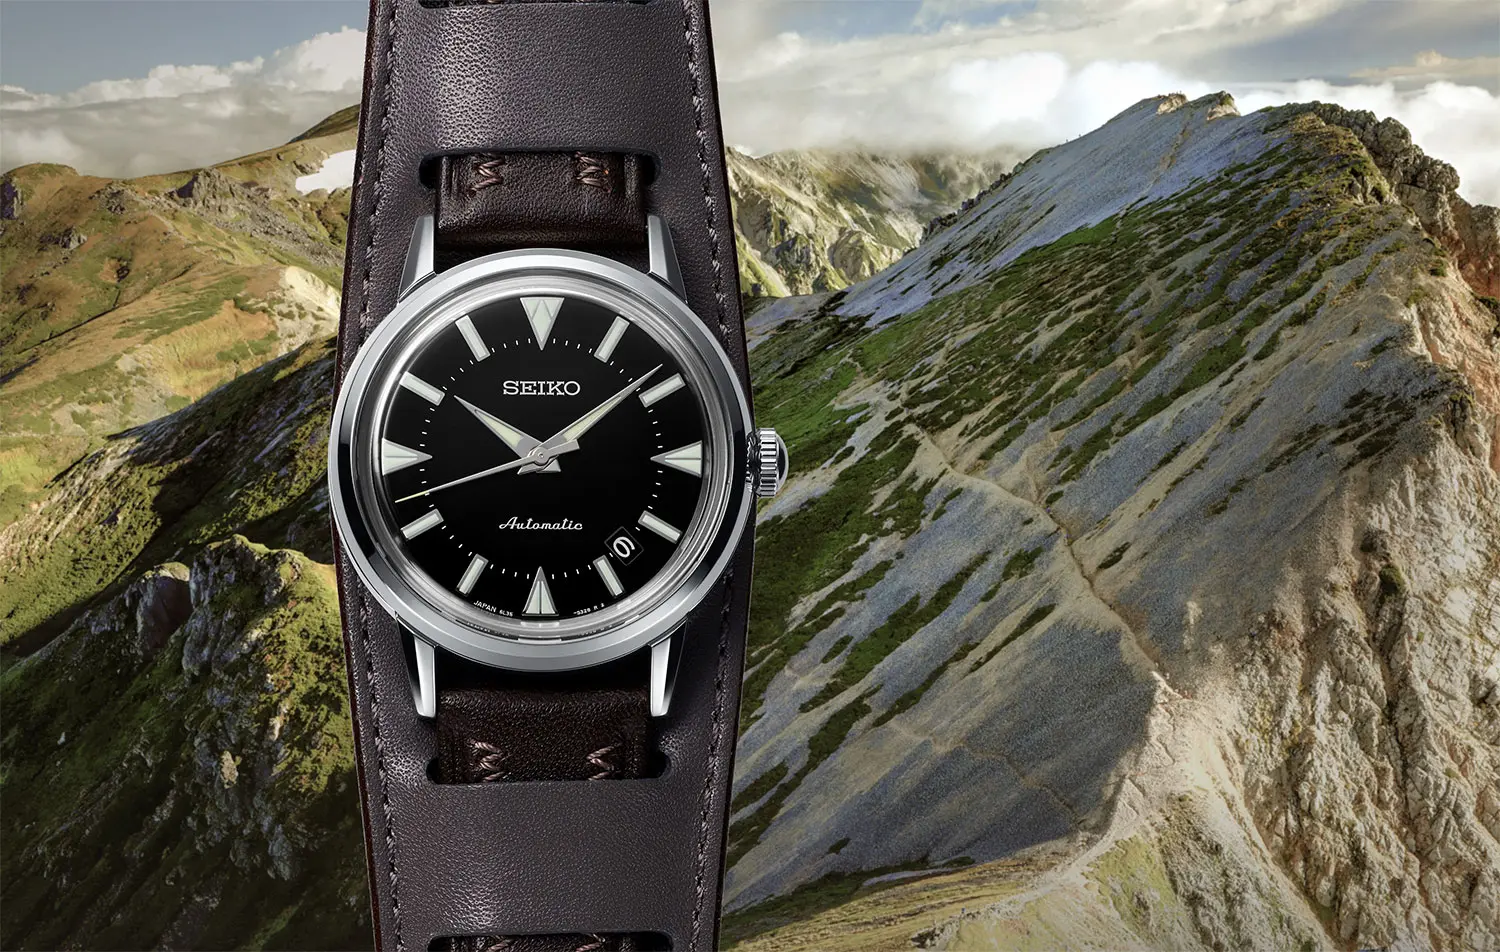 INTRODUCING: The first Seiko we've seen on a bund strap - the Limited  Edition SJE085 Alpinist is a killer version of their first sports watch -  Time and Tide Watches